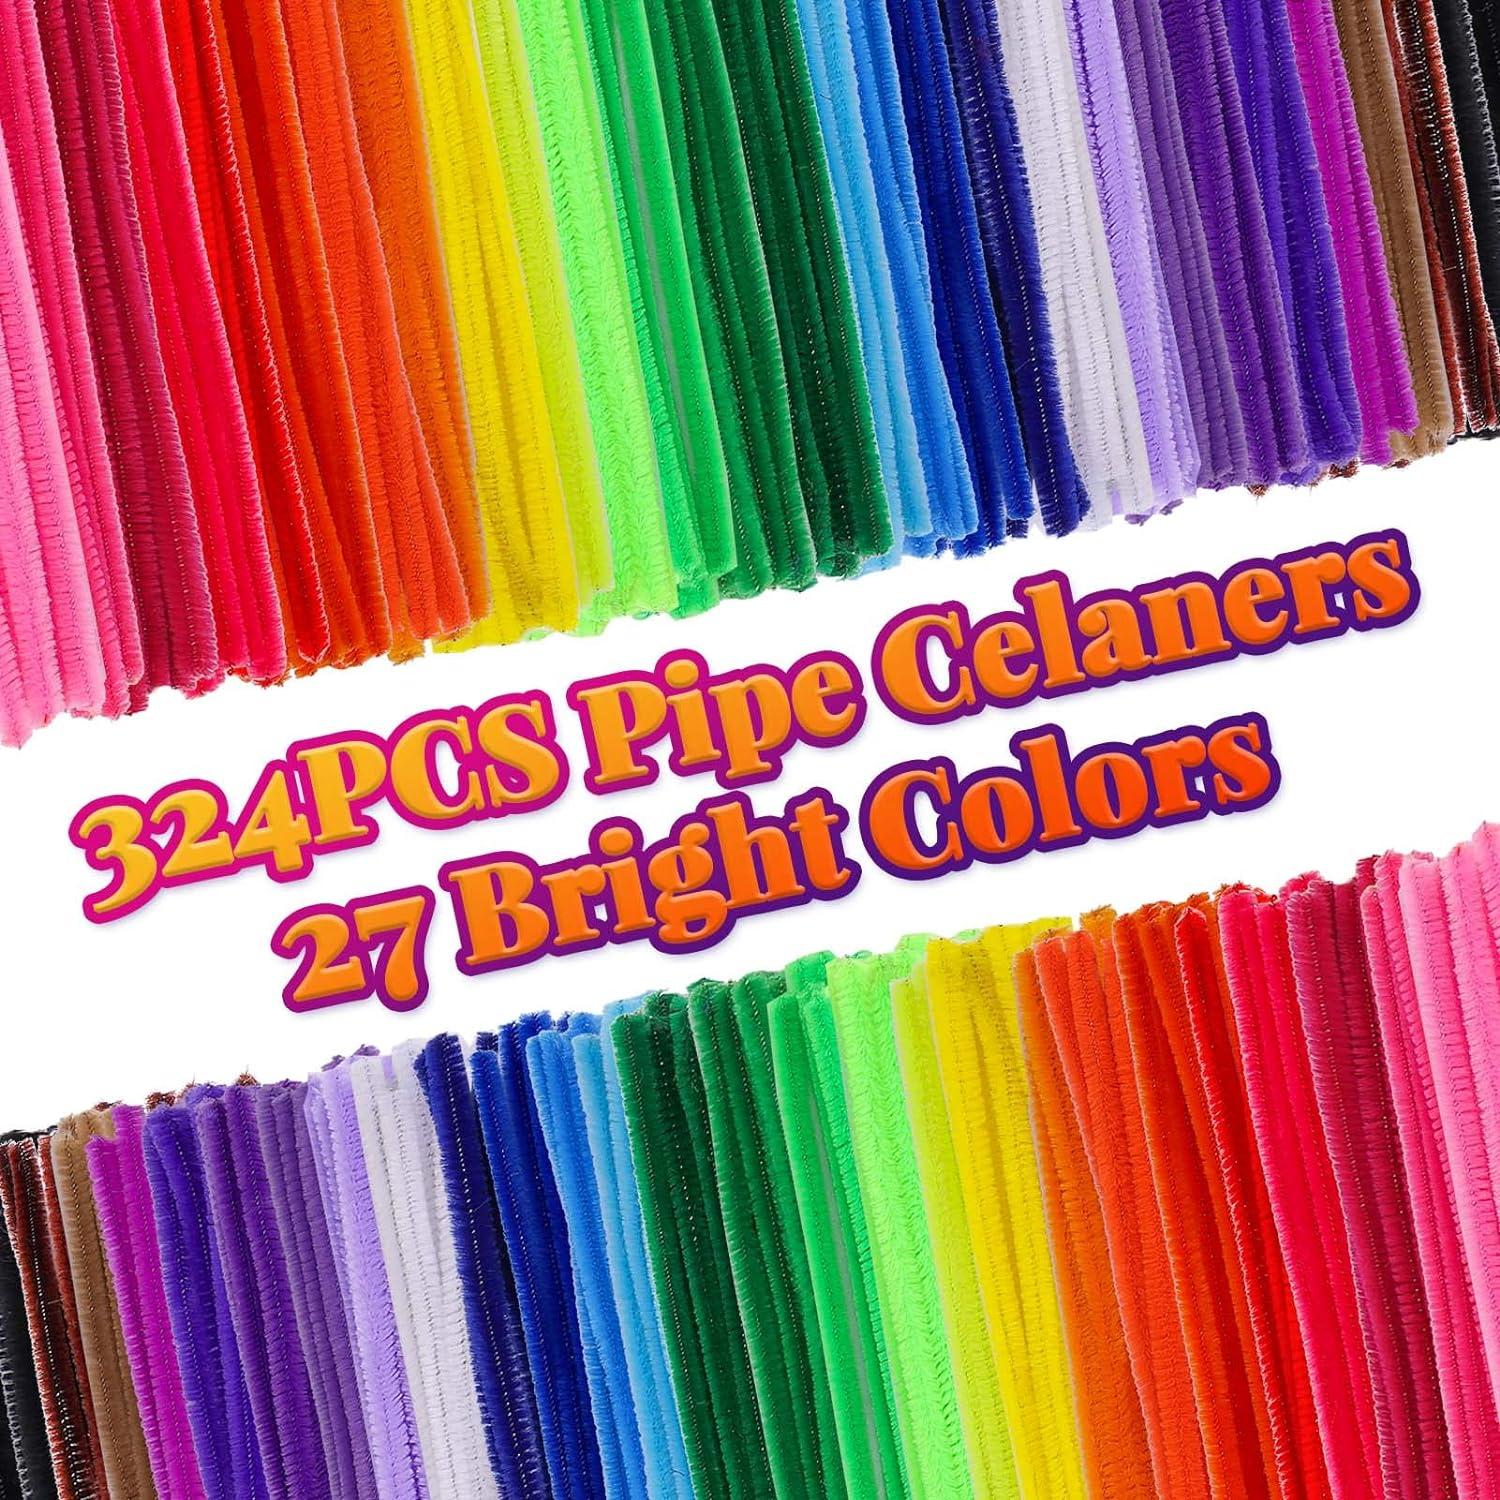 100pcs 6mm X 30cm Pipe Cleaners For Crafts Kids 10 Colours Soft